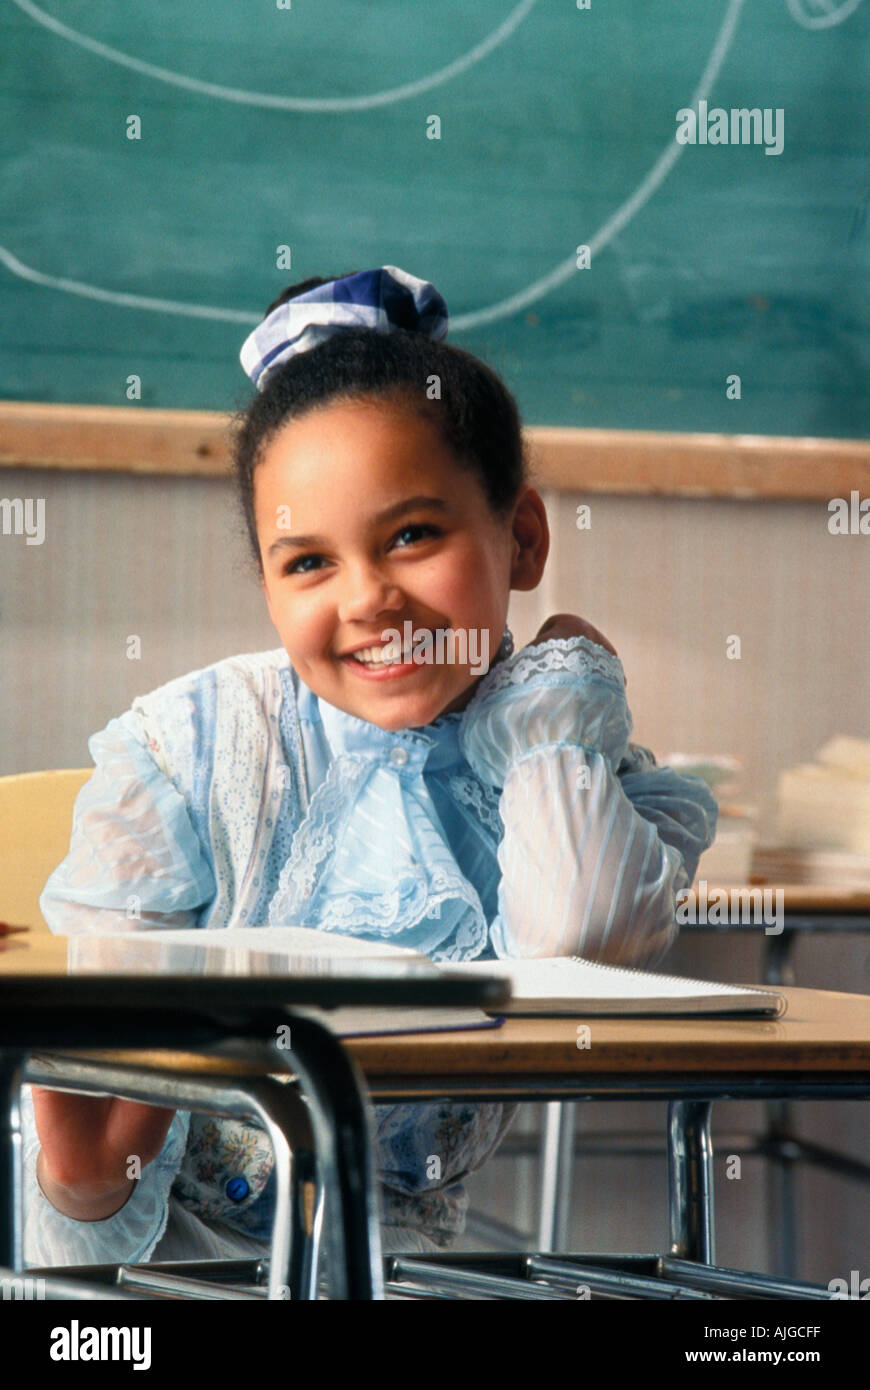 Portrait of Latino female student sitting at desk in class Stock Photo